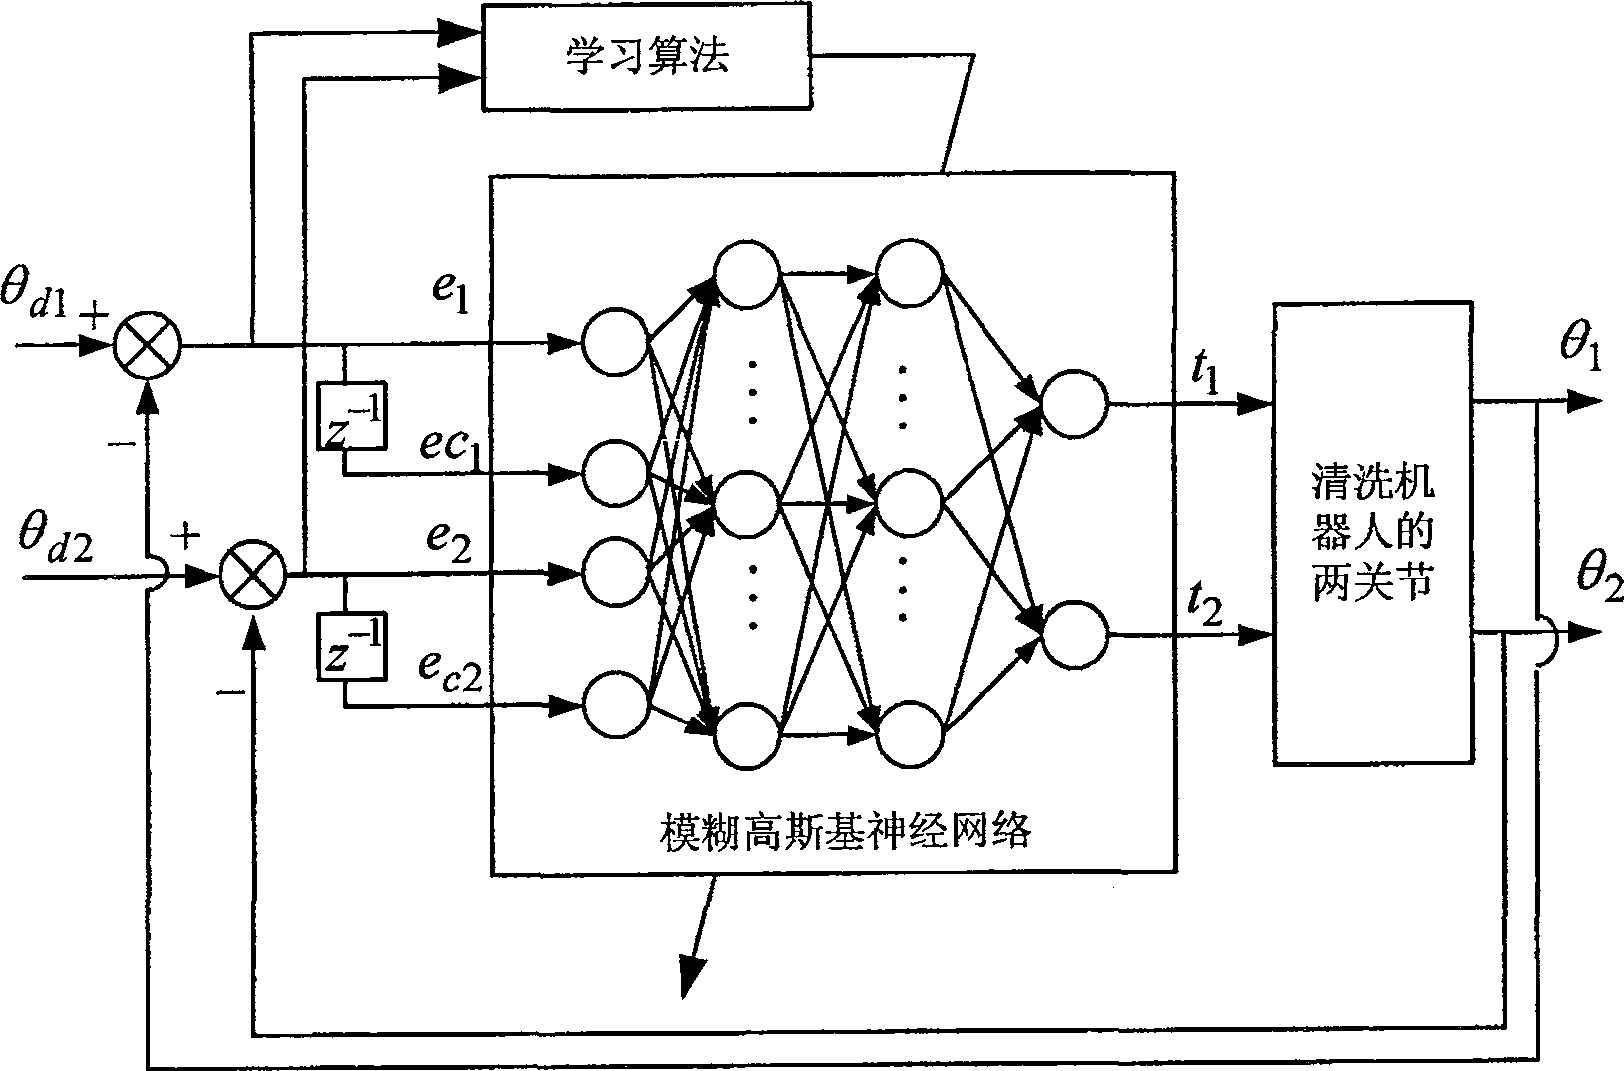 Large condenser underwater operation environment two-joint robot control method